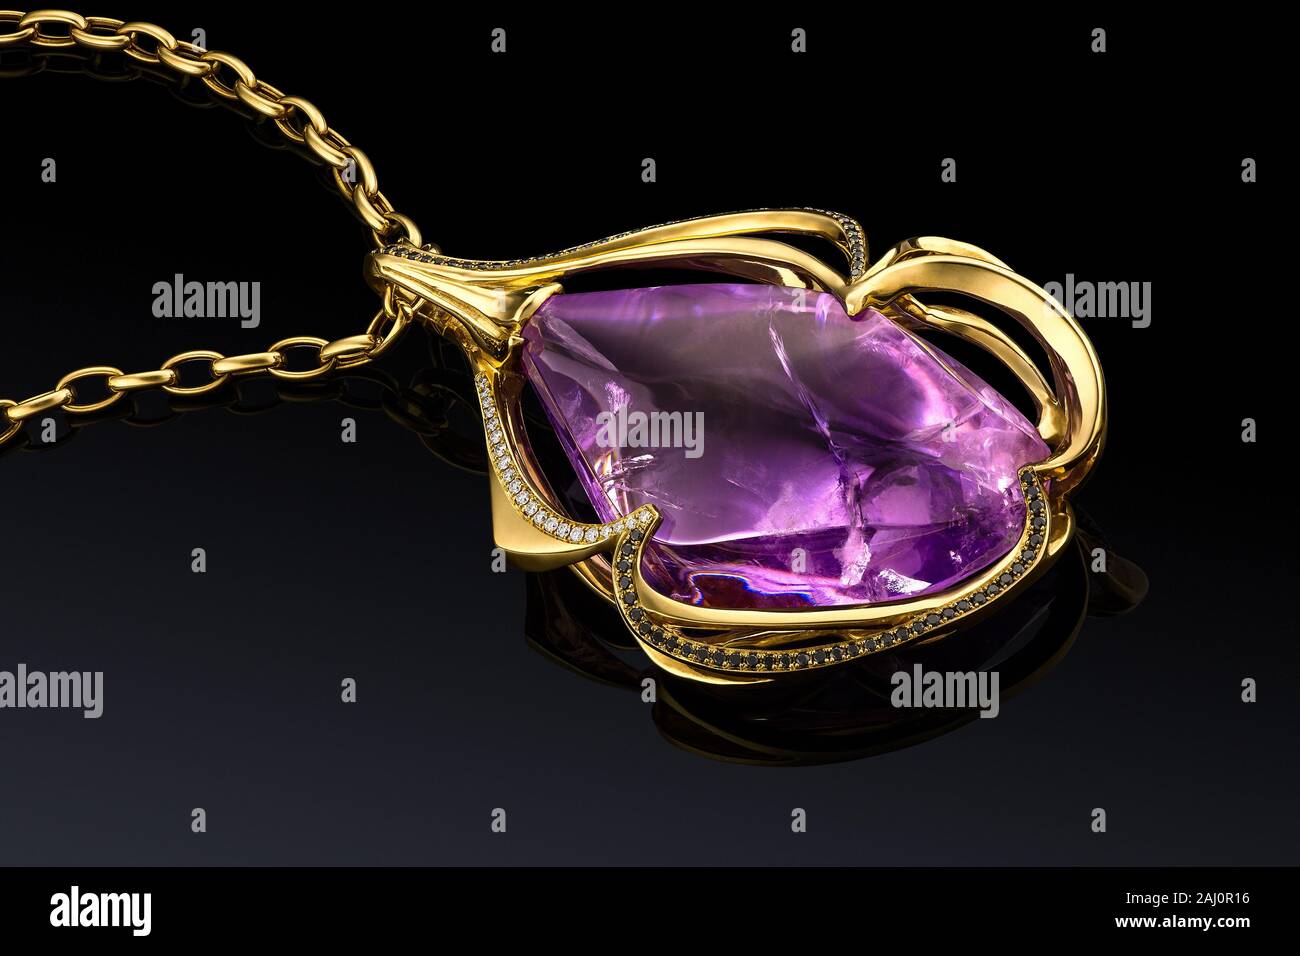 luxury yellow gold pendant with amethyst and diamonds isolated on black background with reflection, included clipping path. extreme close up. Stock Photo